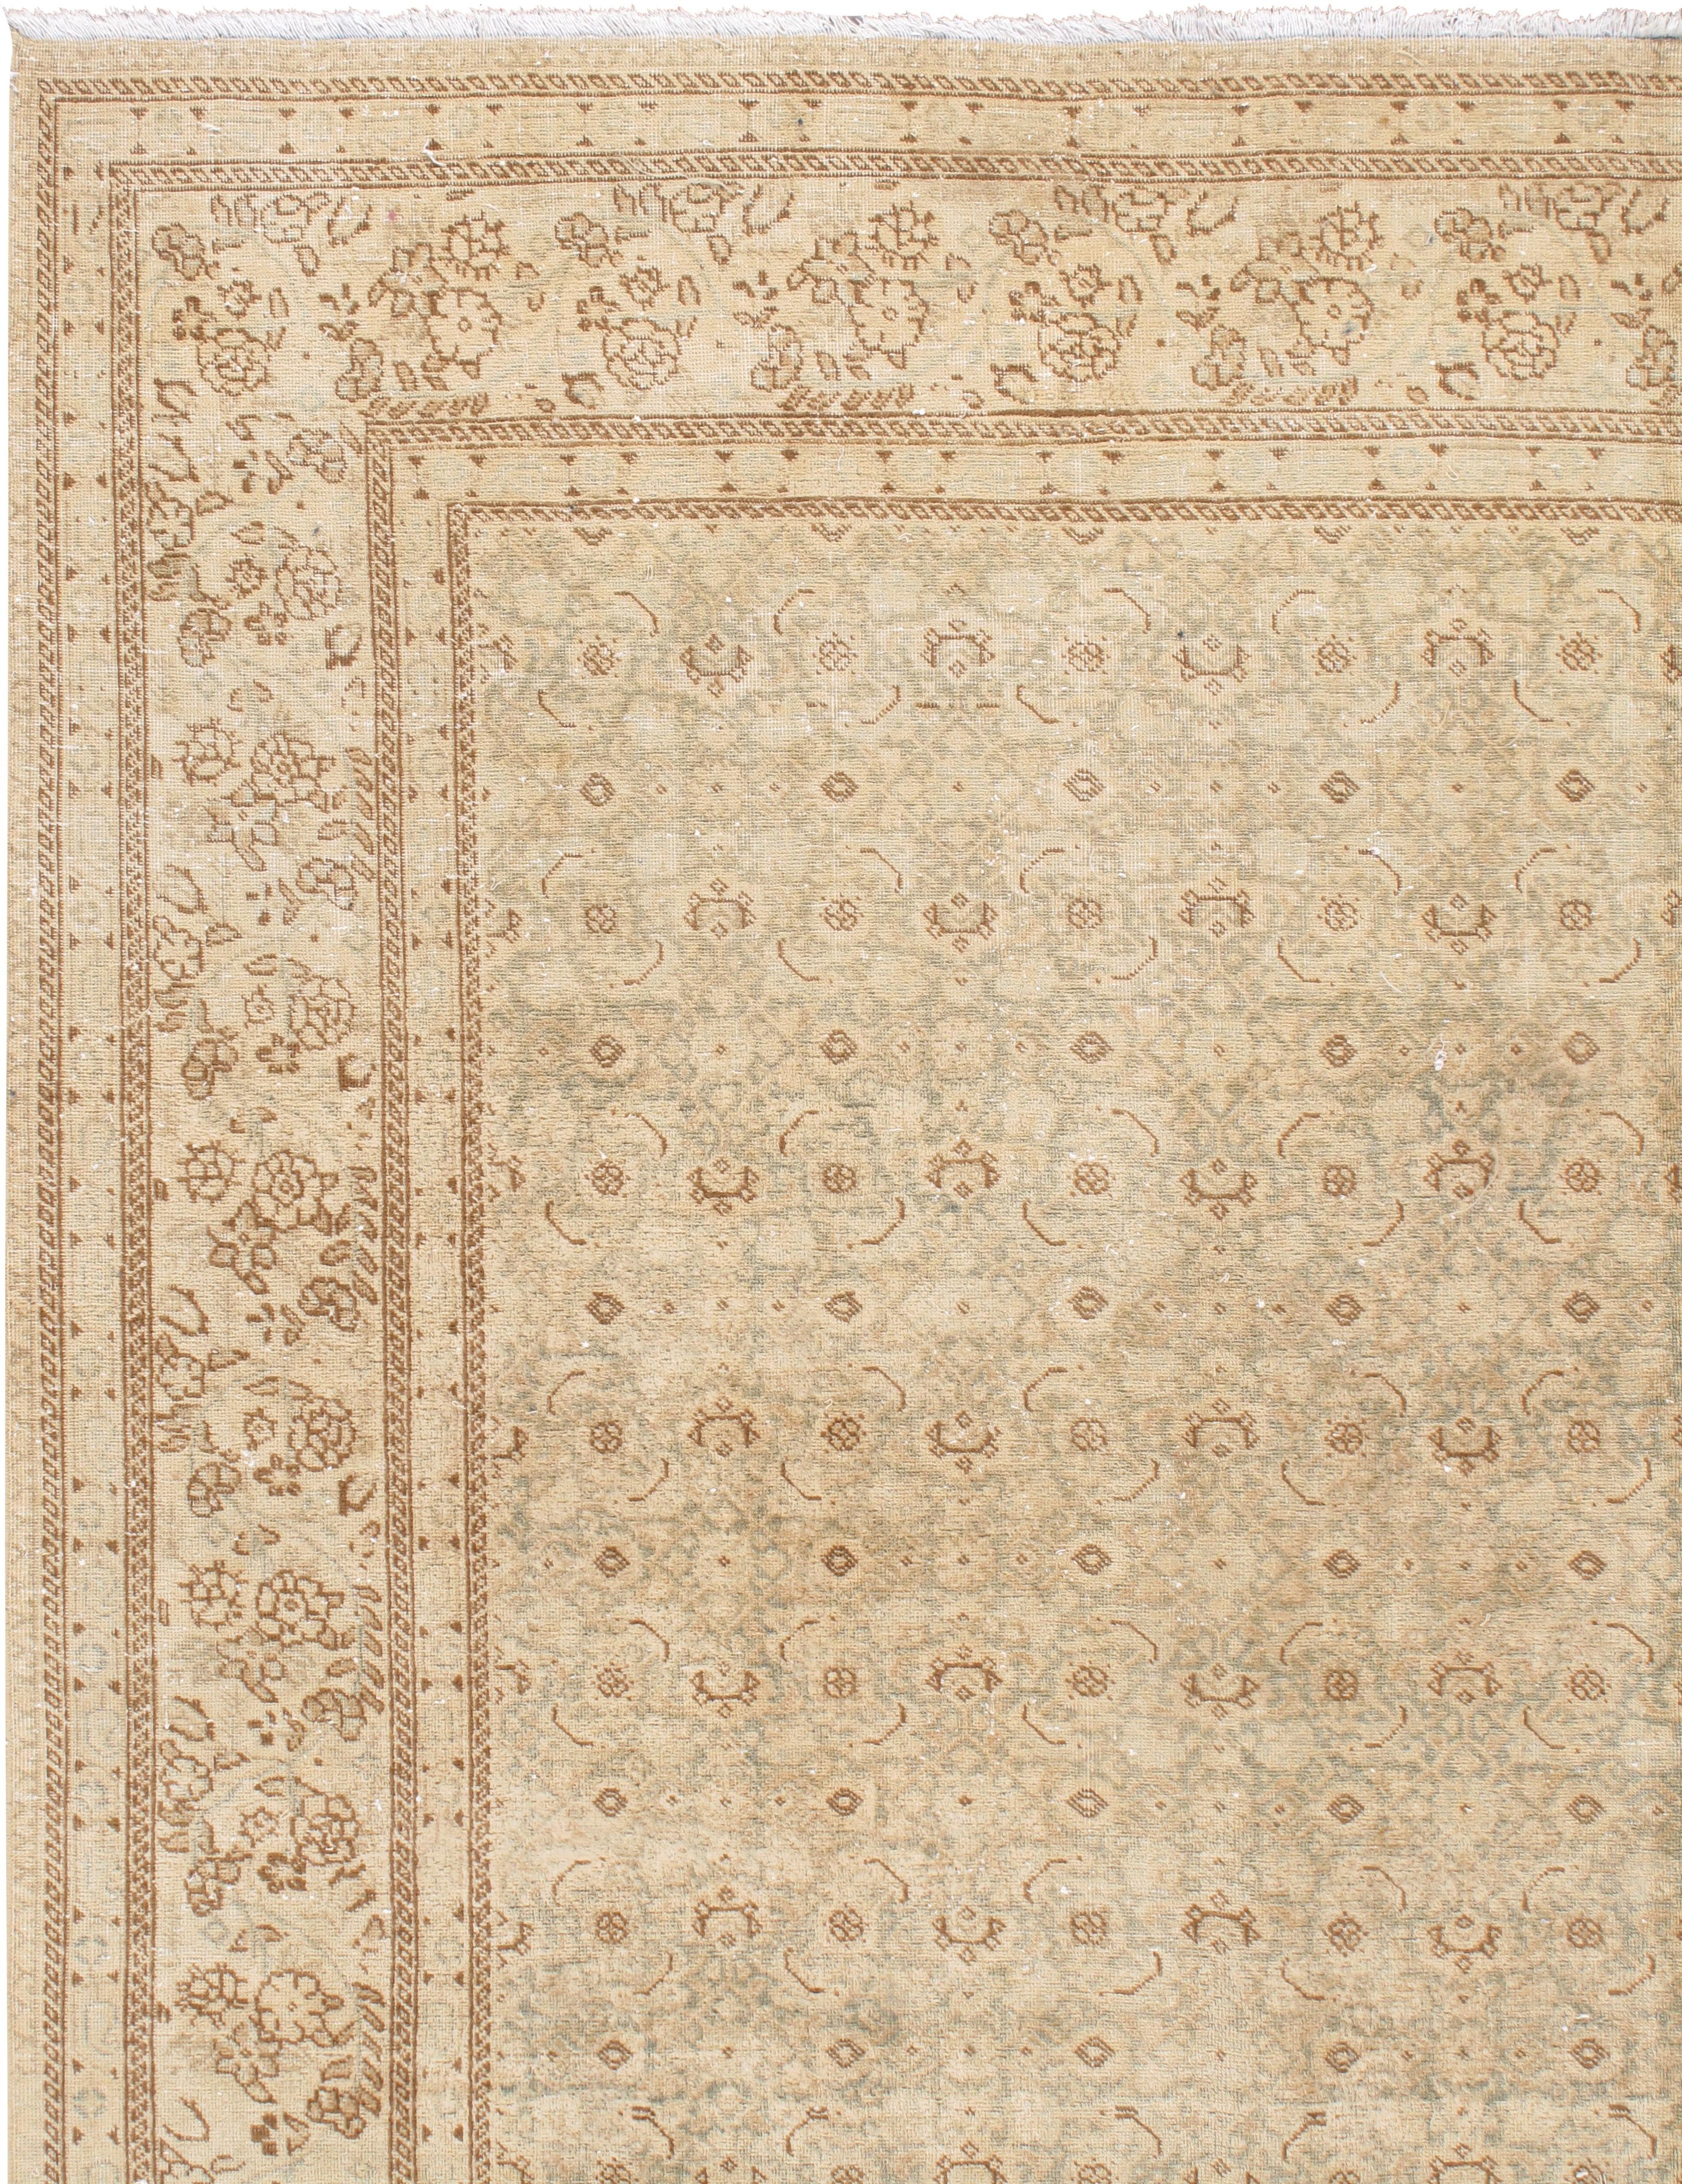 Vintage distressed Persian Tabriz rug carpet, circa 1920, measures: 8'5 x 14'10. A distressed carpet is not an abused one, but one that has been artfully recreated to follow current decorating style trends. Lida Lavender’s distressed carpets are